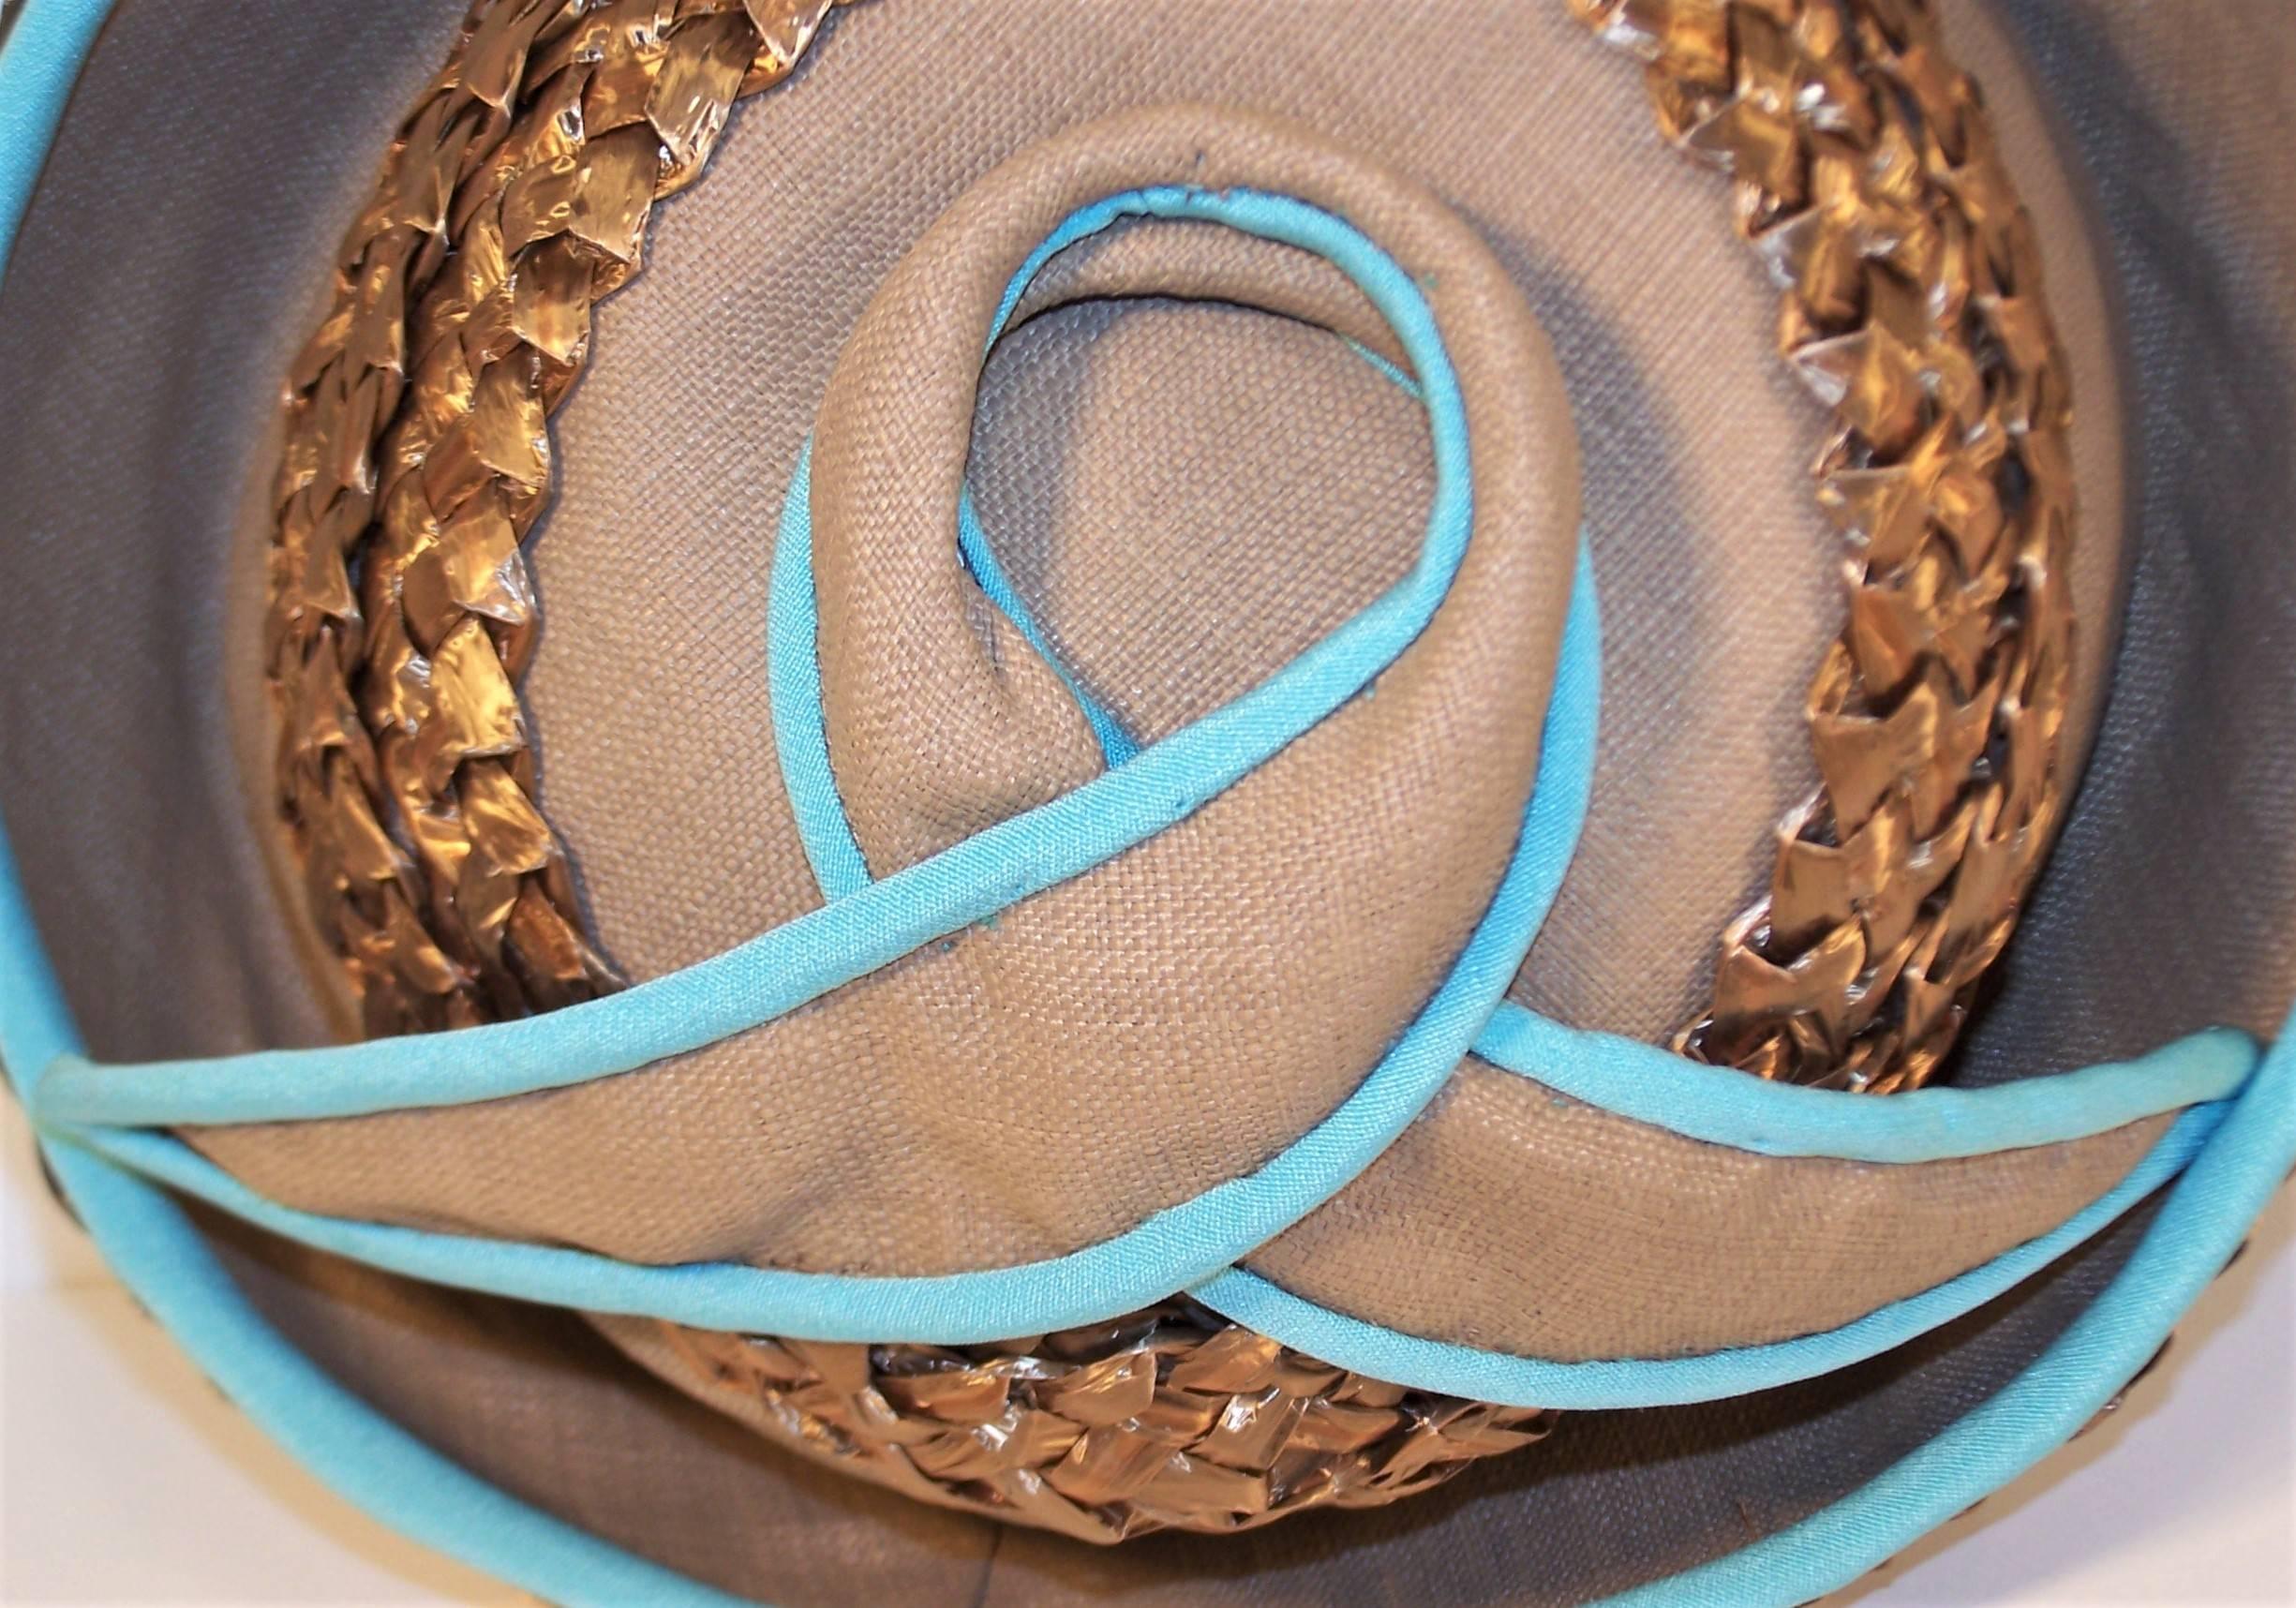 Bonta Creatrice Brown Linen & Straw Hat With Turquoise Details, 1960’s For Sale 2